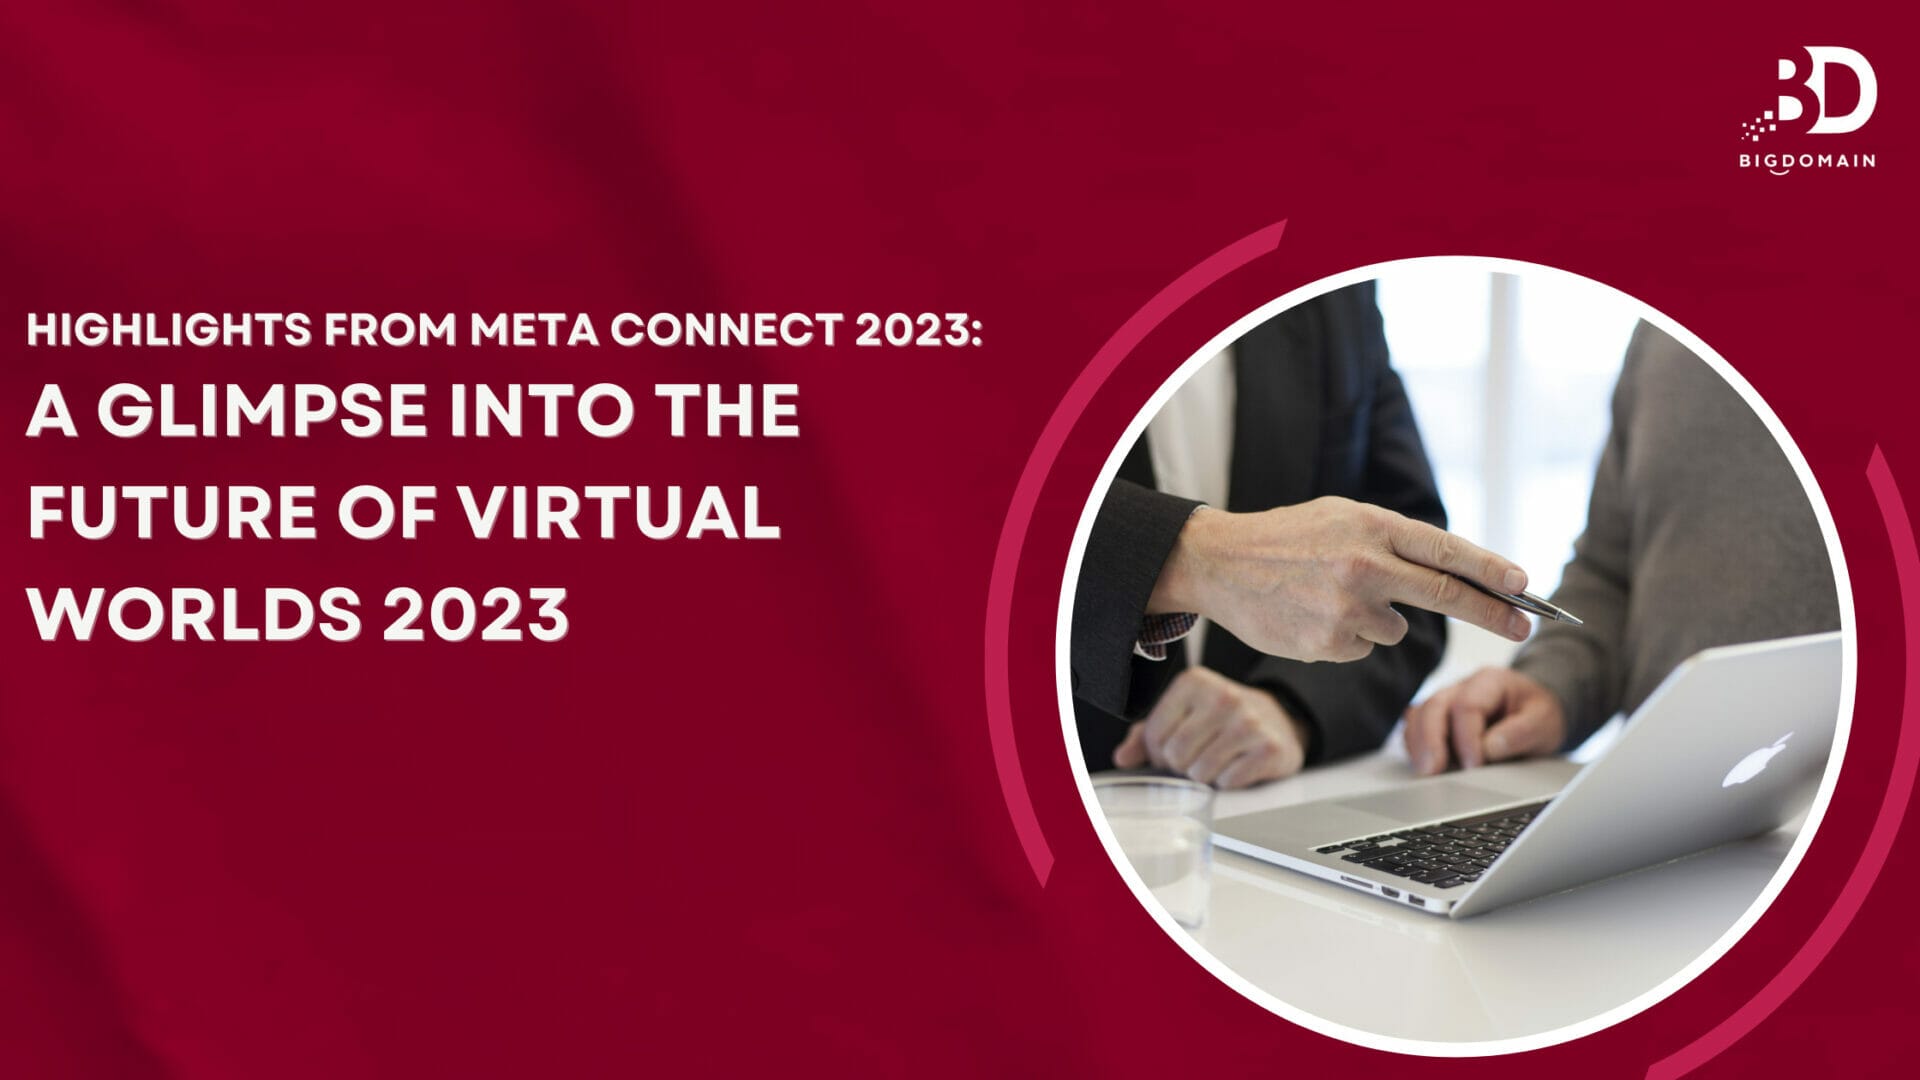 Highlights from Meta Connect 2023: A Glimpse into the Future of Virtual Worlds – September 27, 2023